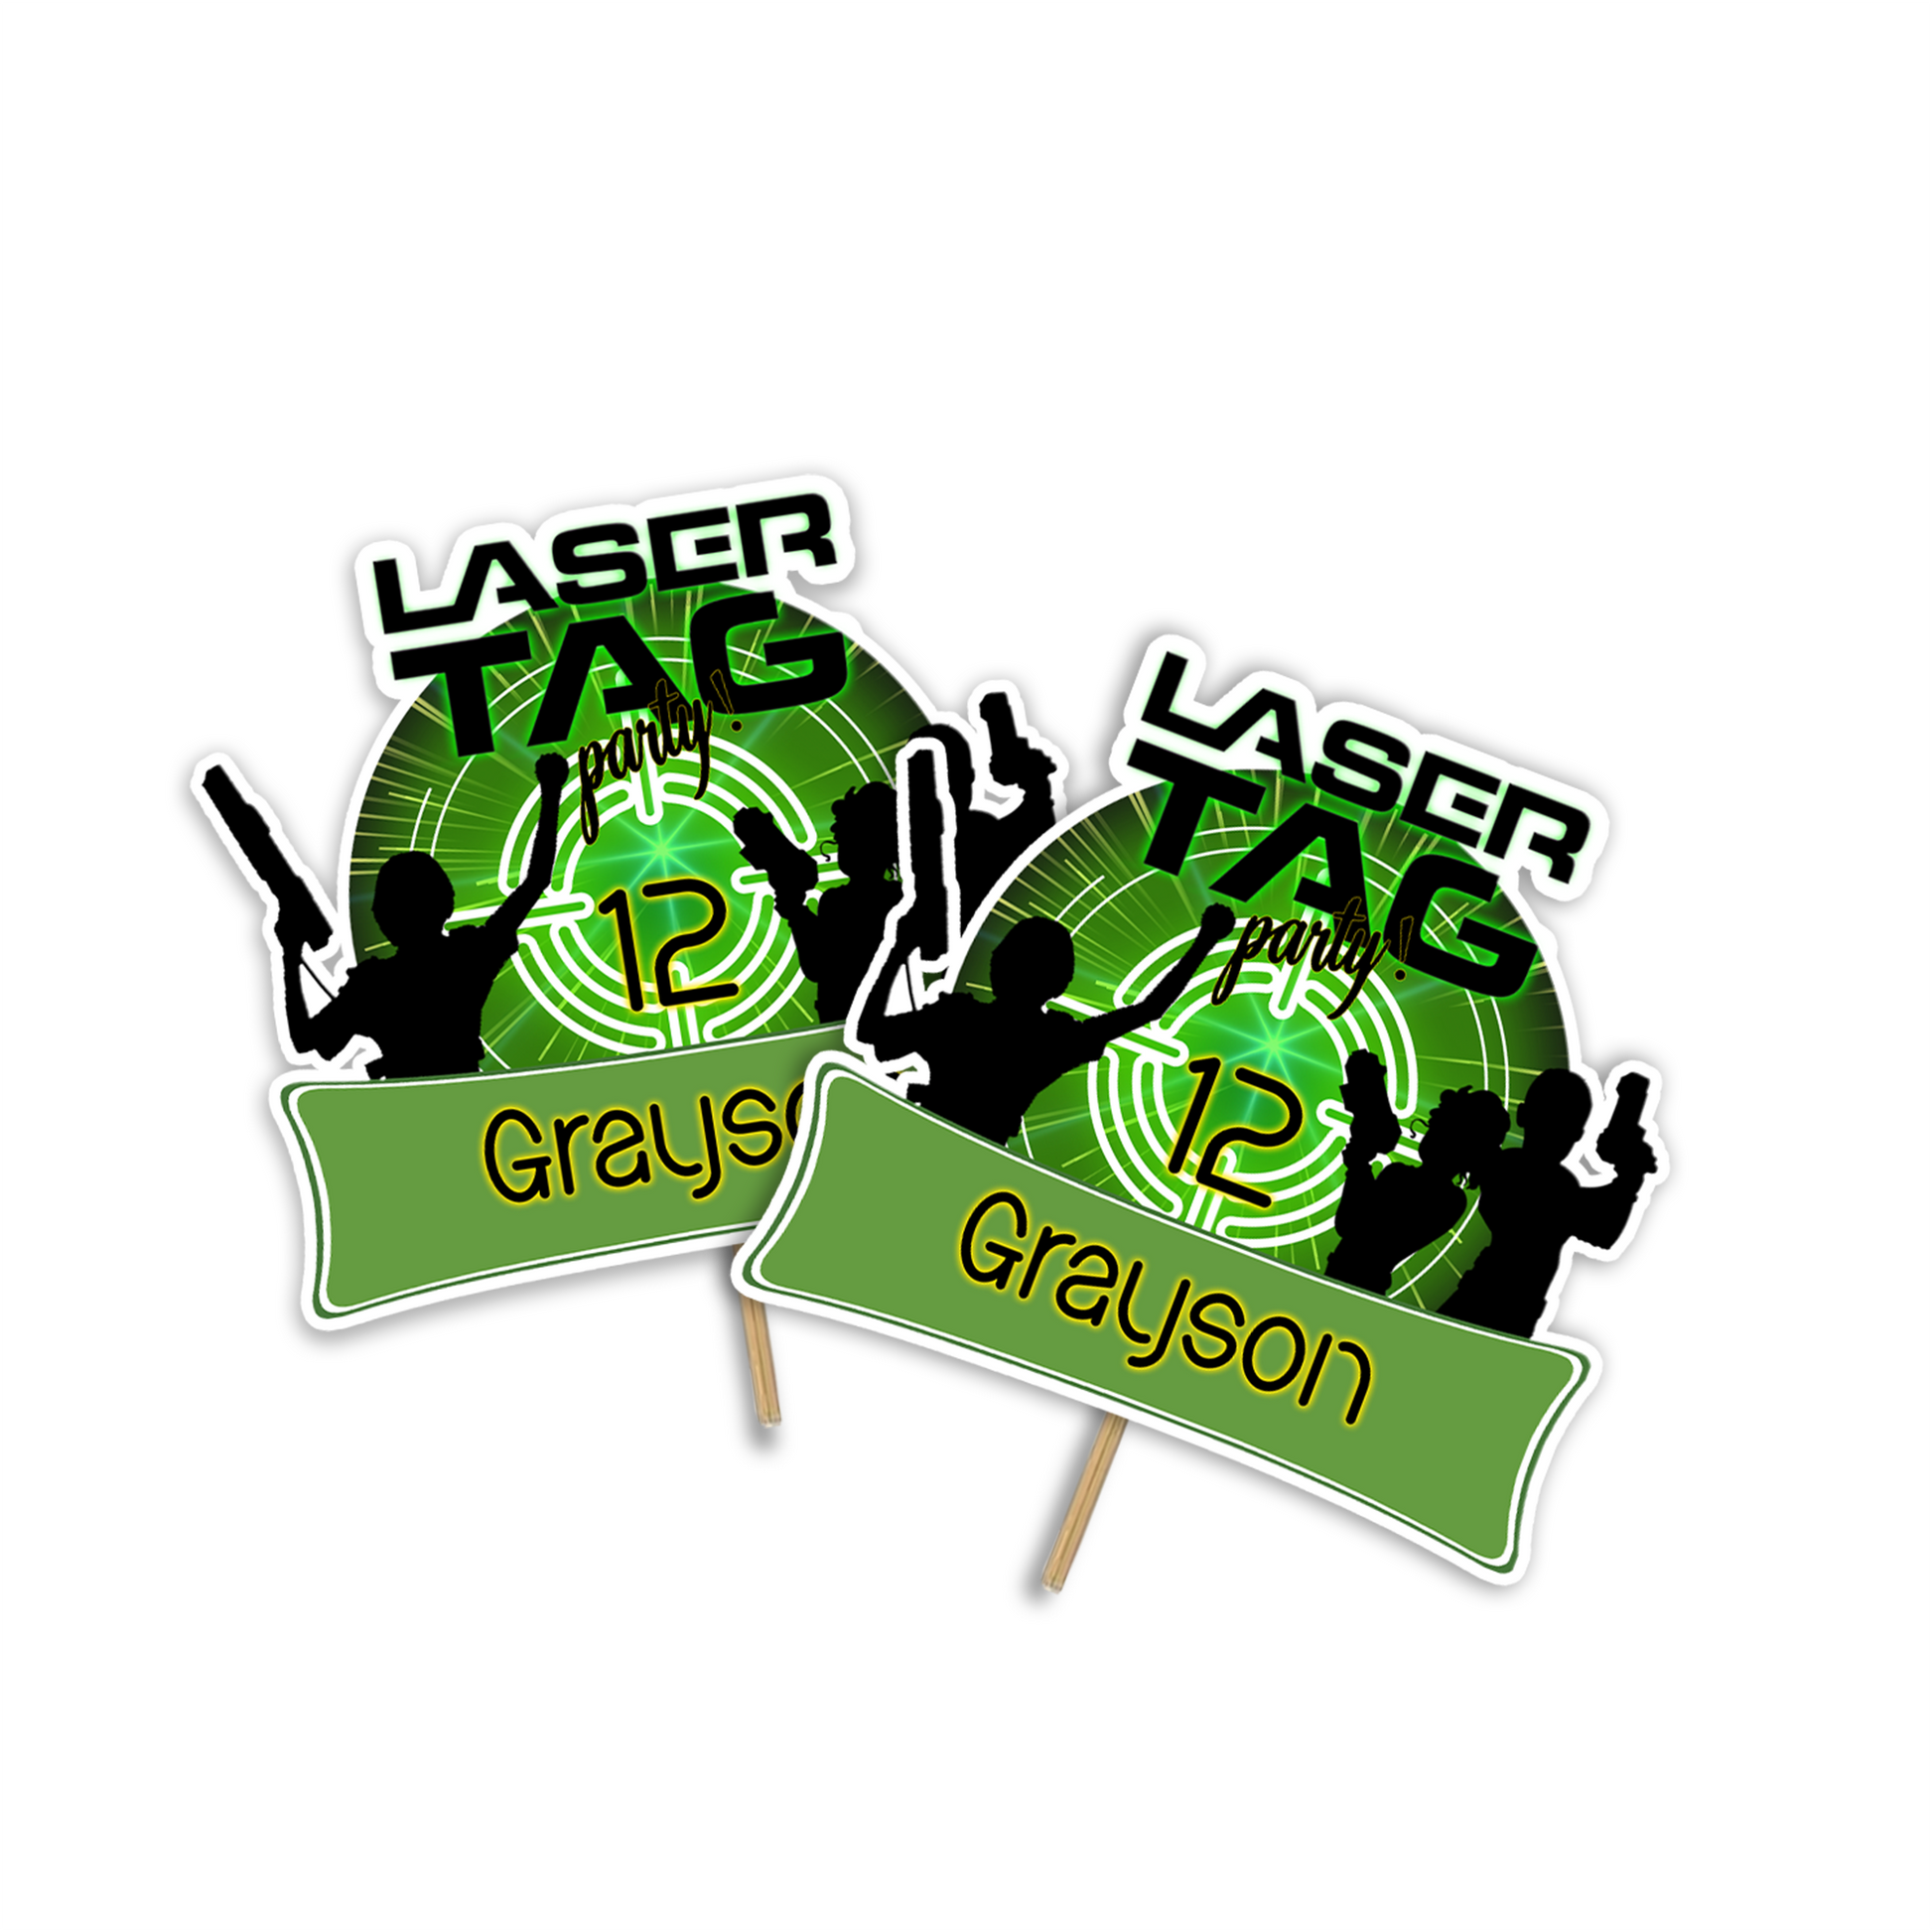 Personalized Cake Toppers for a Laser Tag themed party